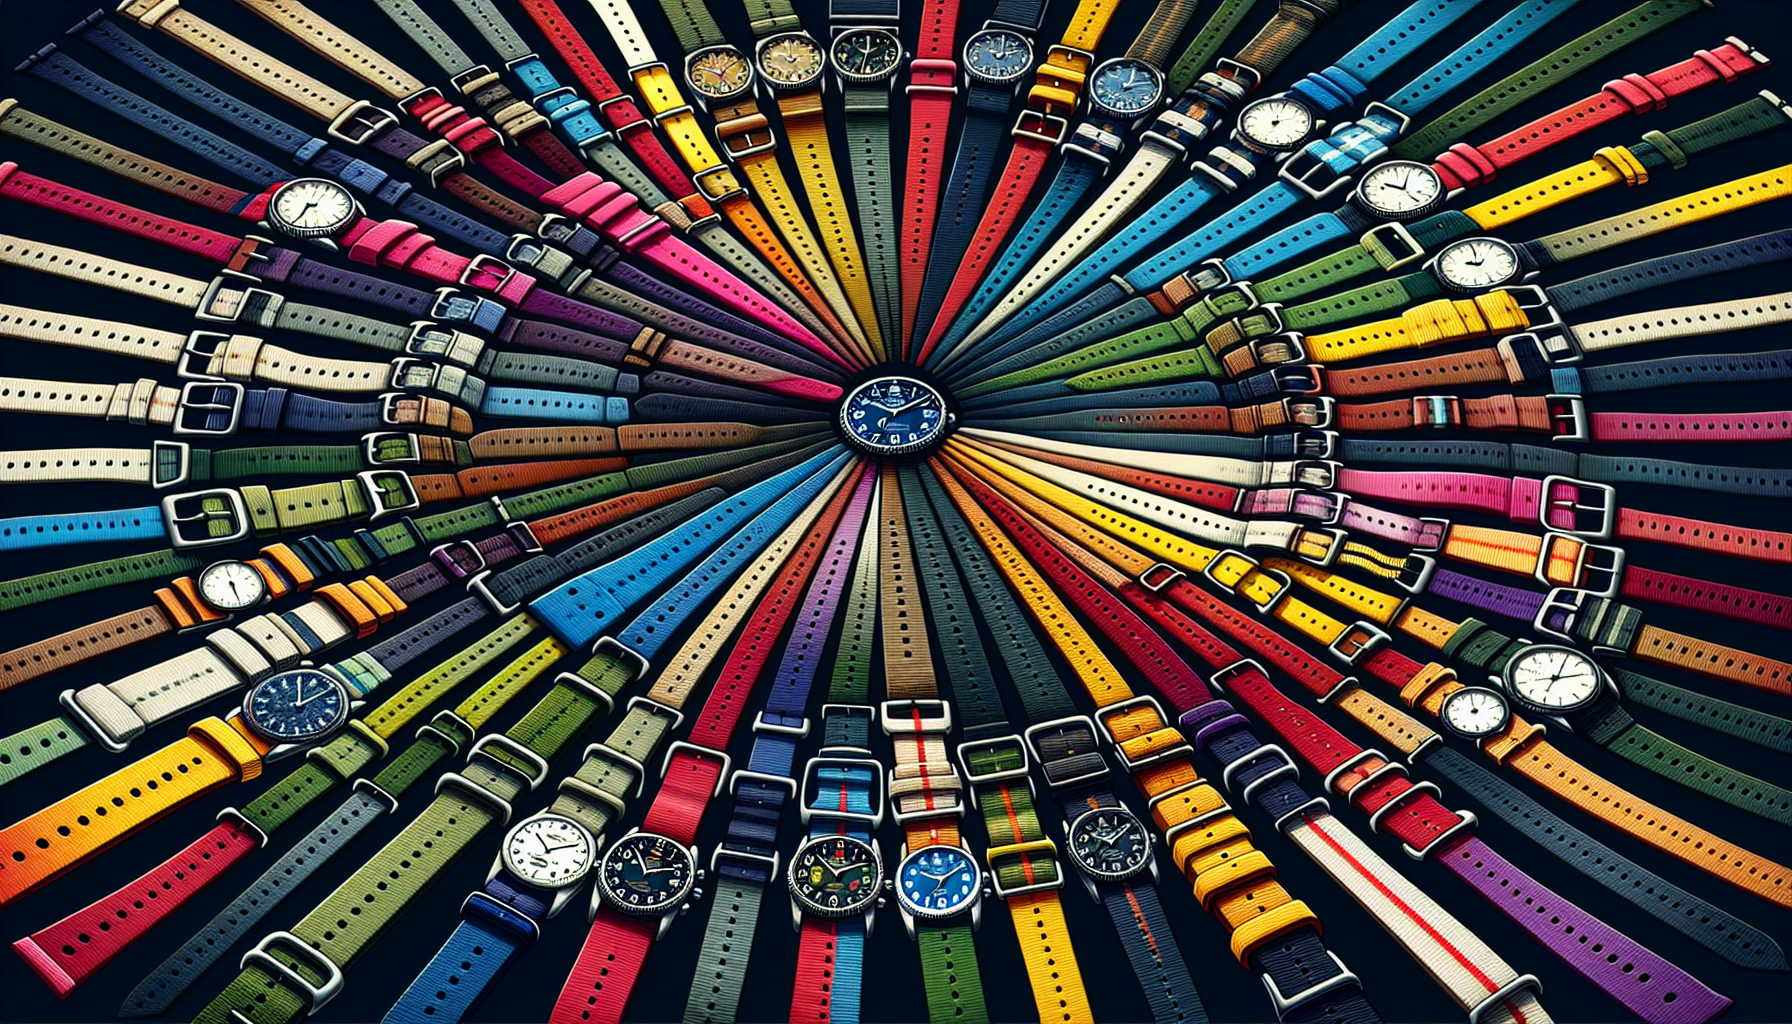 Colorful palette of RAF-inspired watch straps